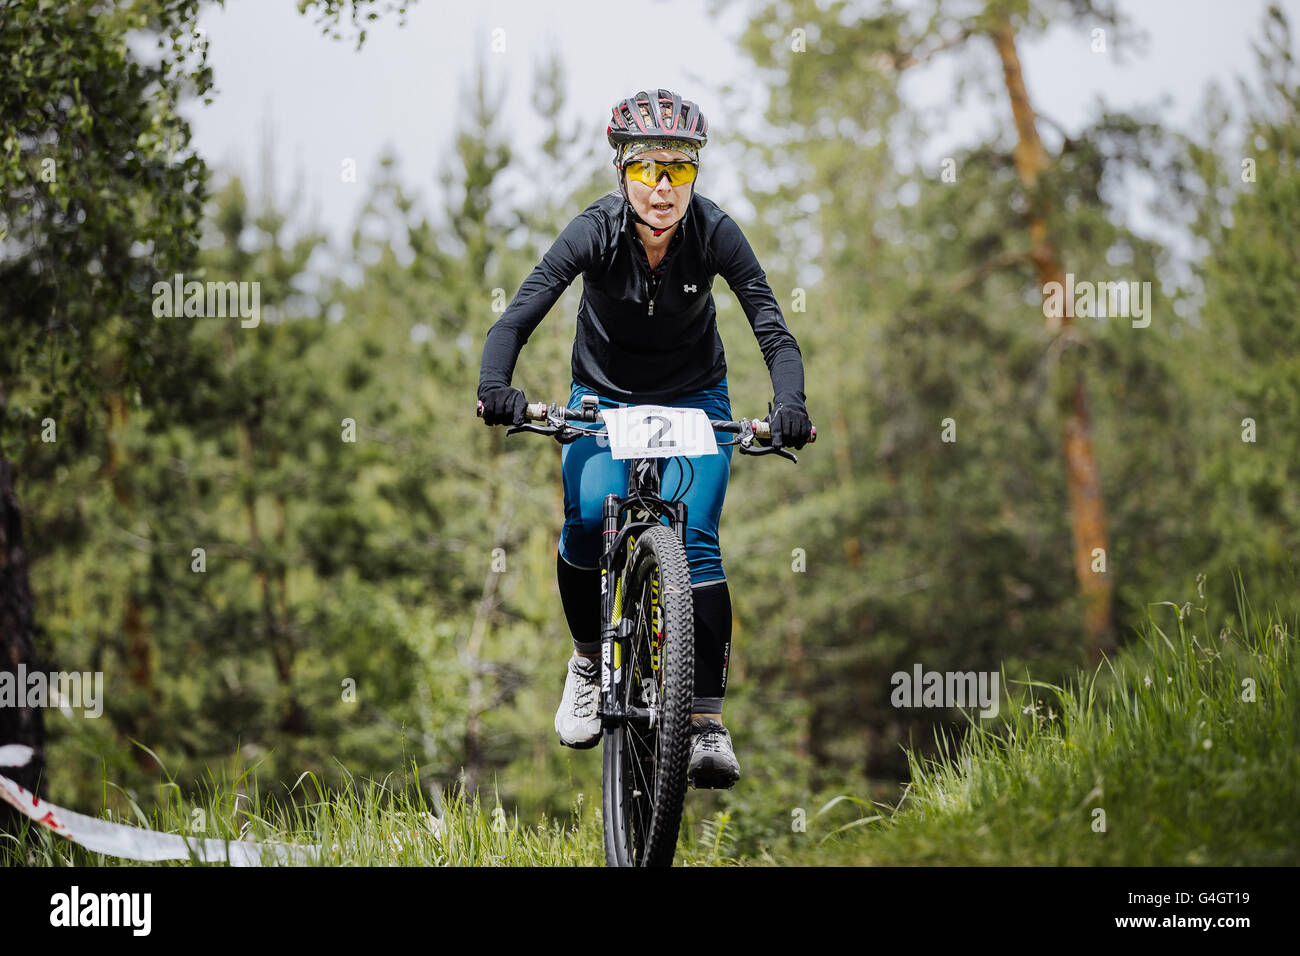 young girl athlete cyclist rides through forest during cross-country race 'New energy' Stock Photo